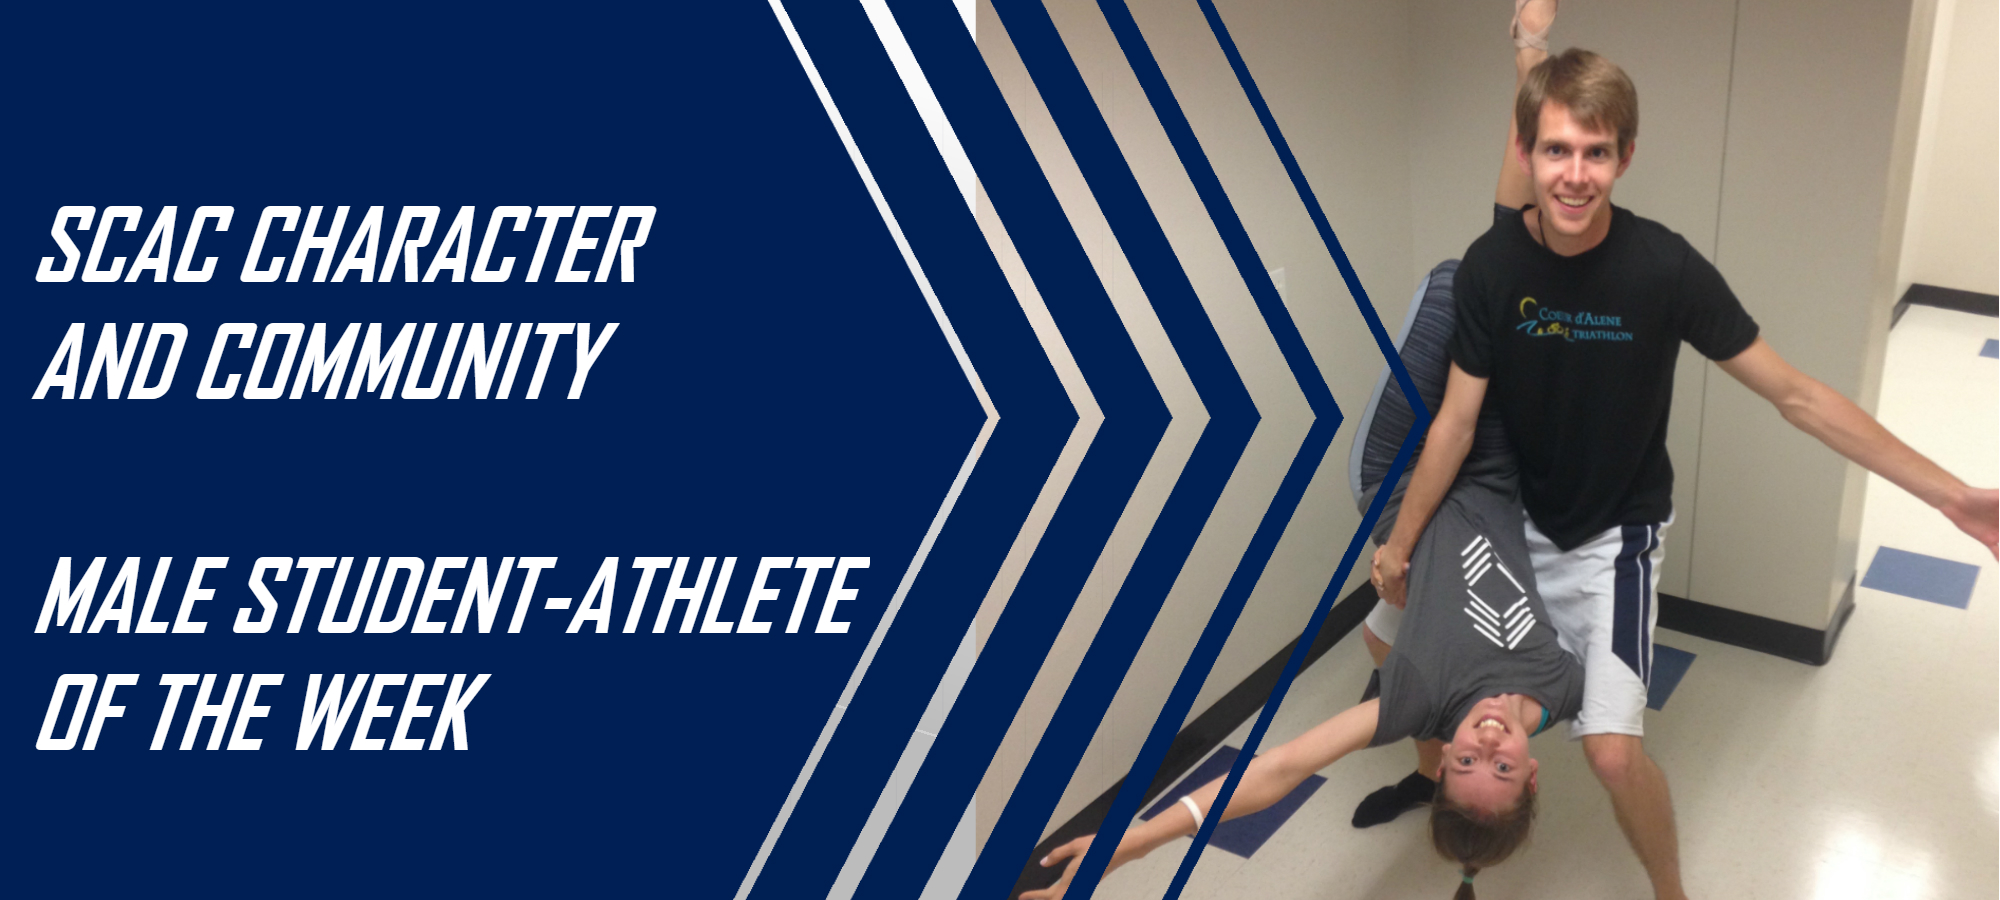 Men's Cross Country Peter deTar earns SCAC Character & Community Recognition